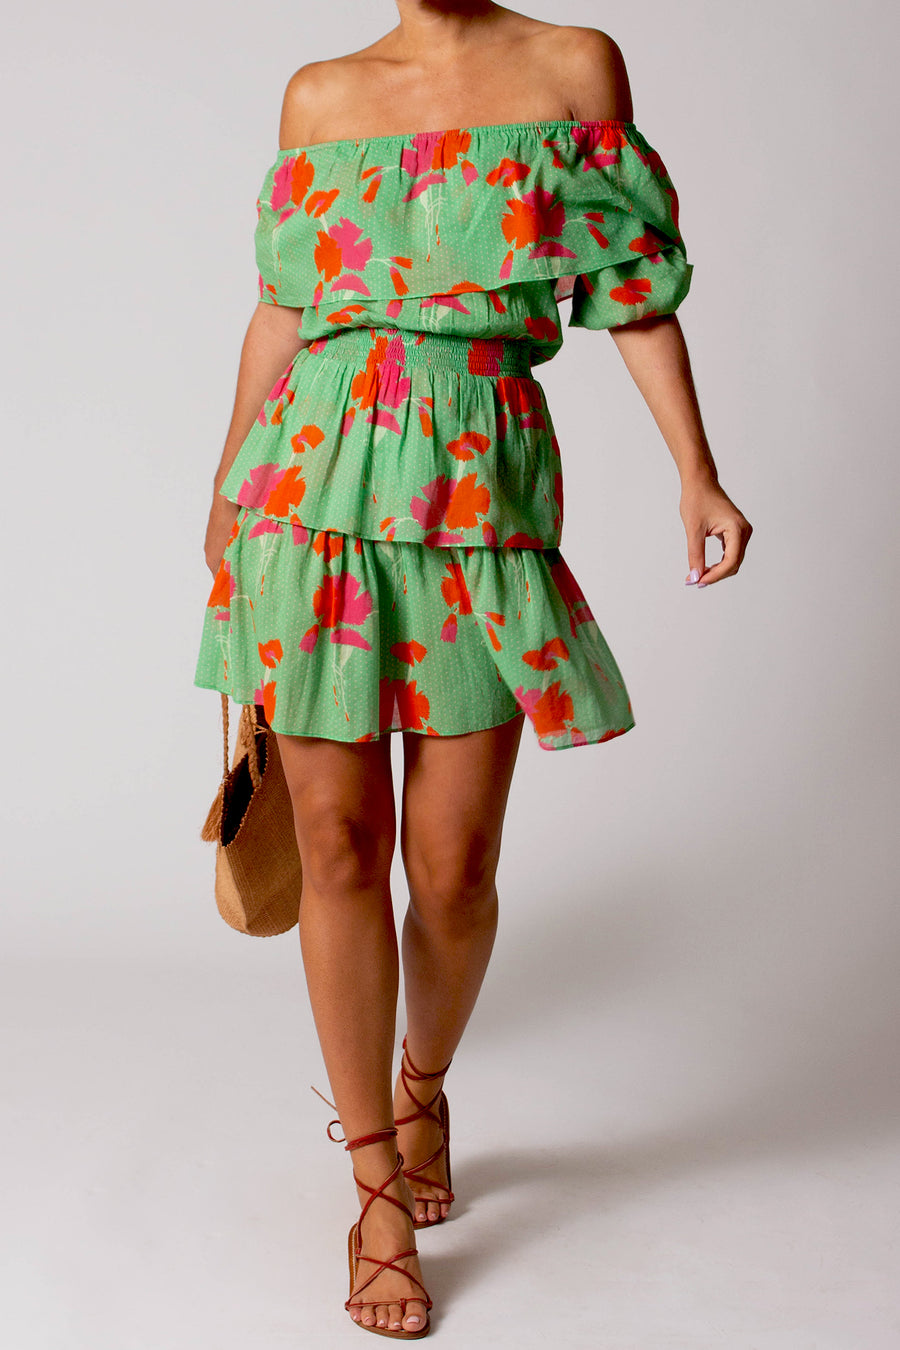 This is the photo of a woman wearing a green dress with a pink and orange floral pattern.